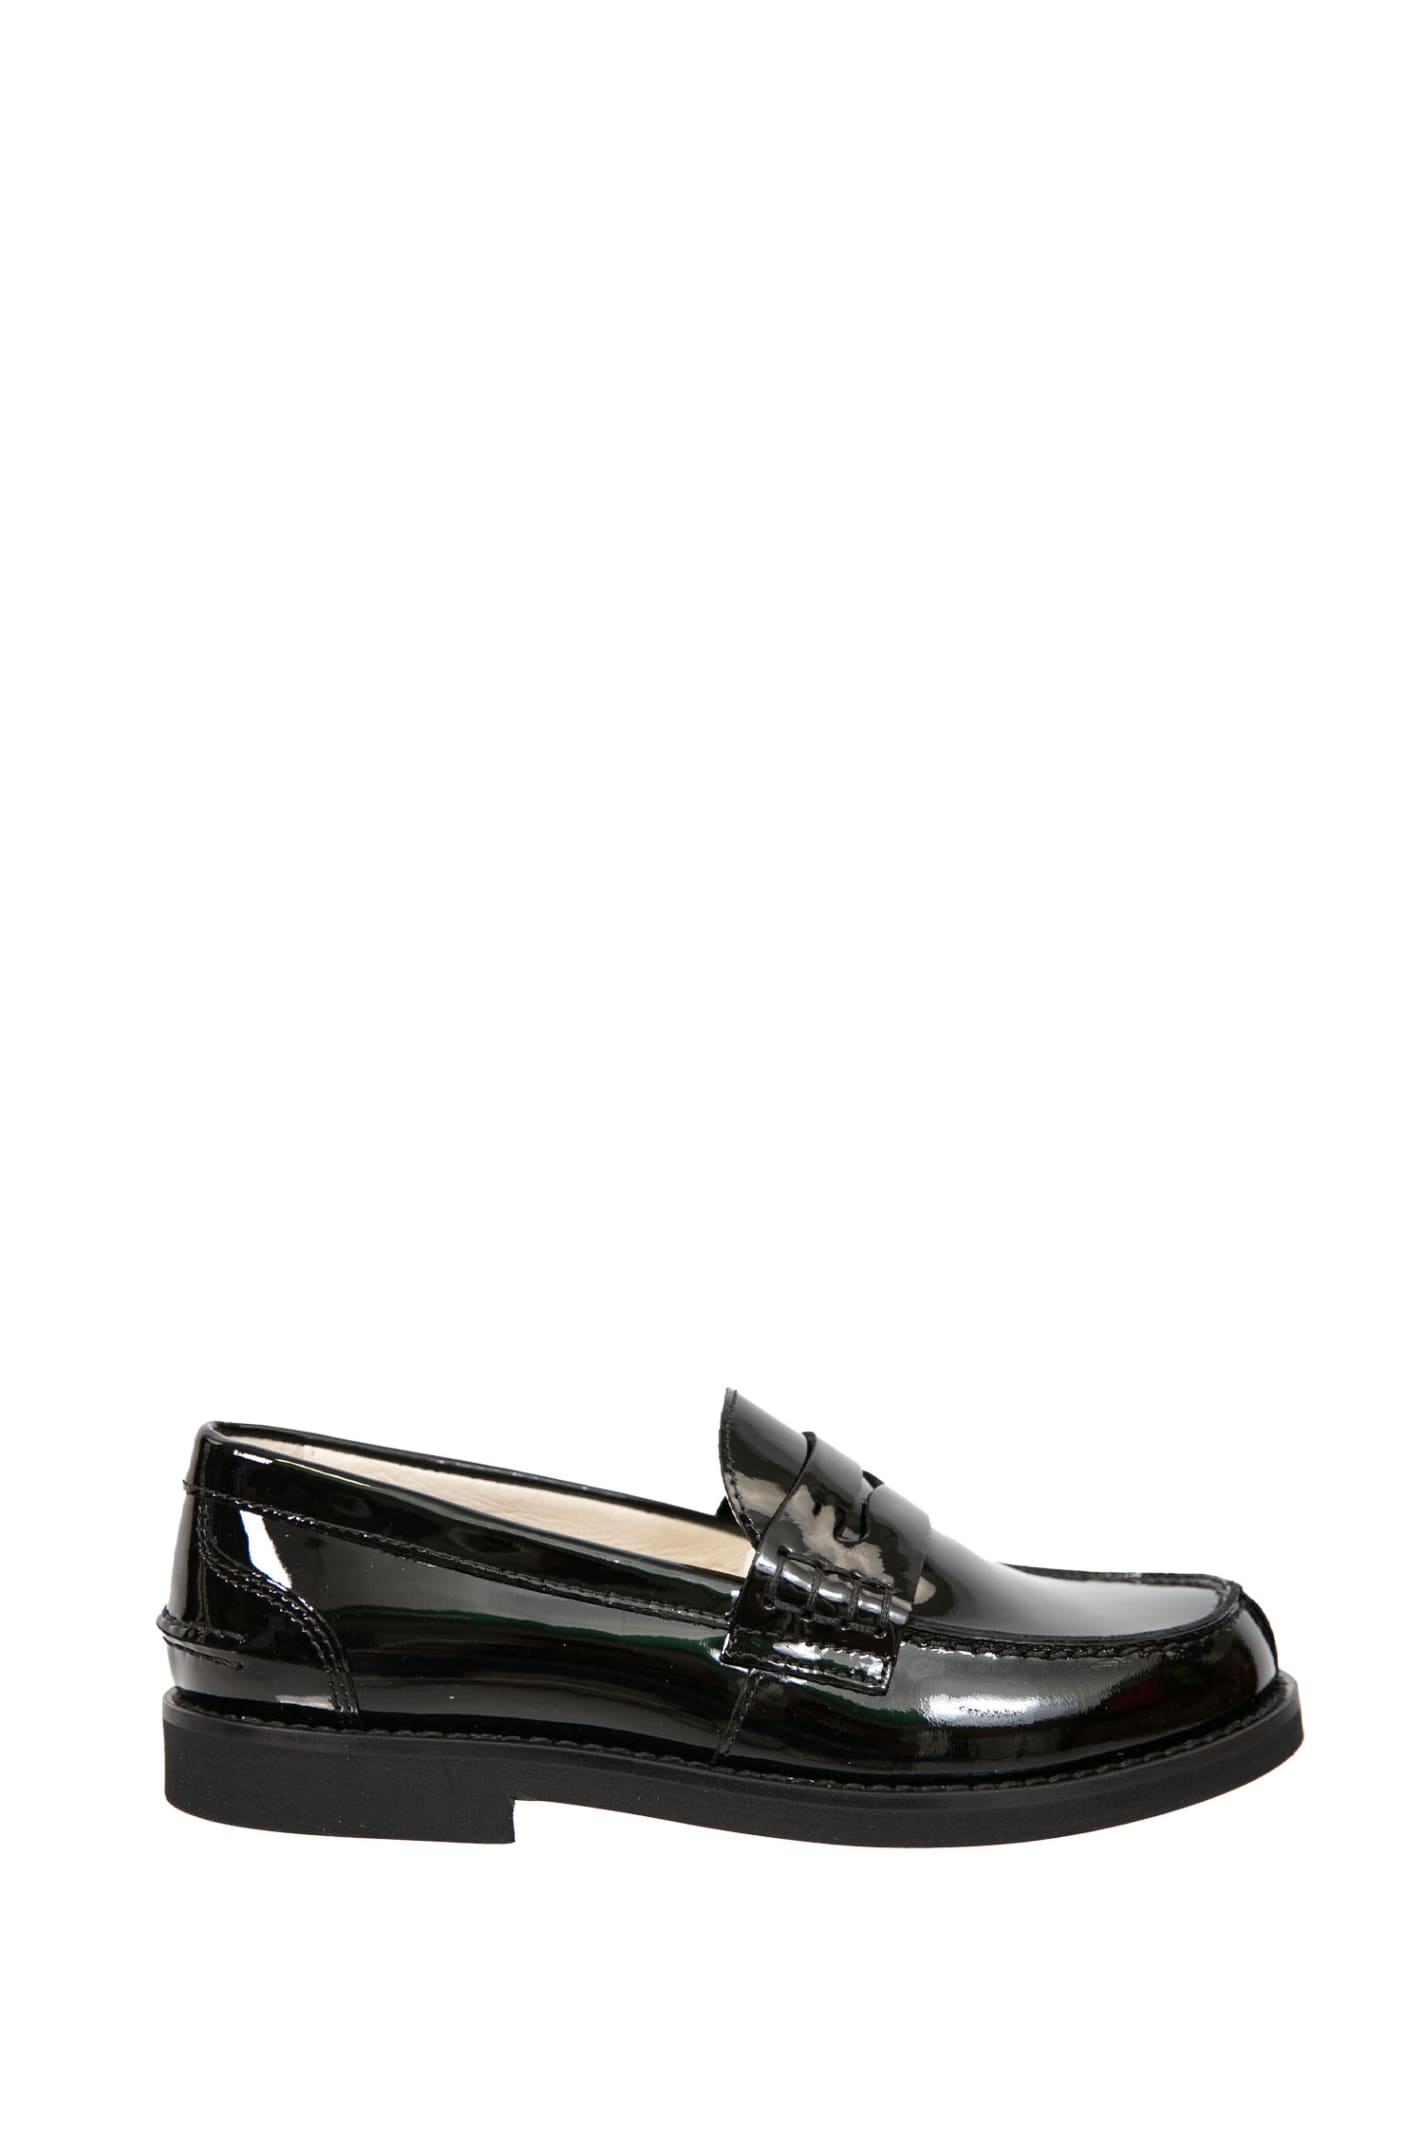 Andrea Montelpare Kids' Patent Leather Loafers